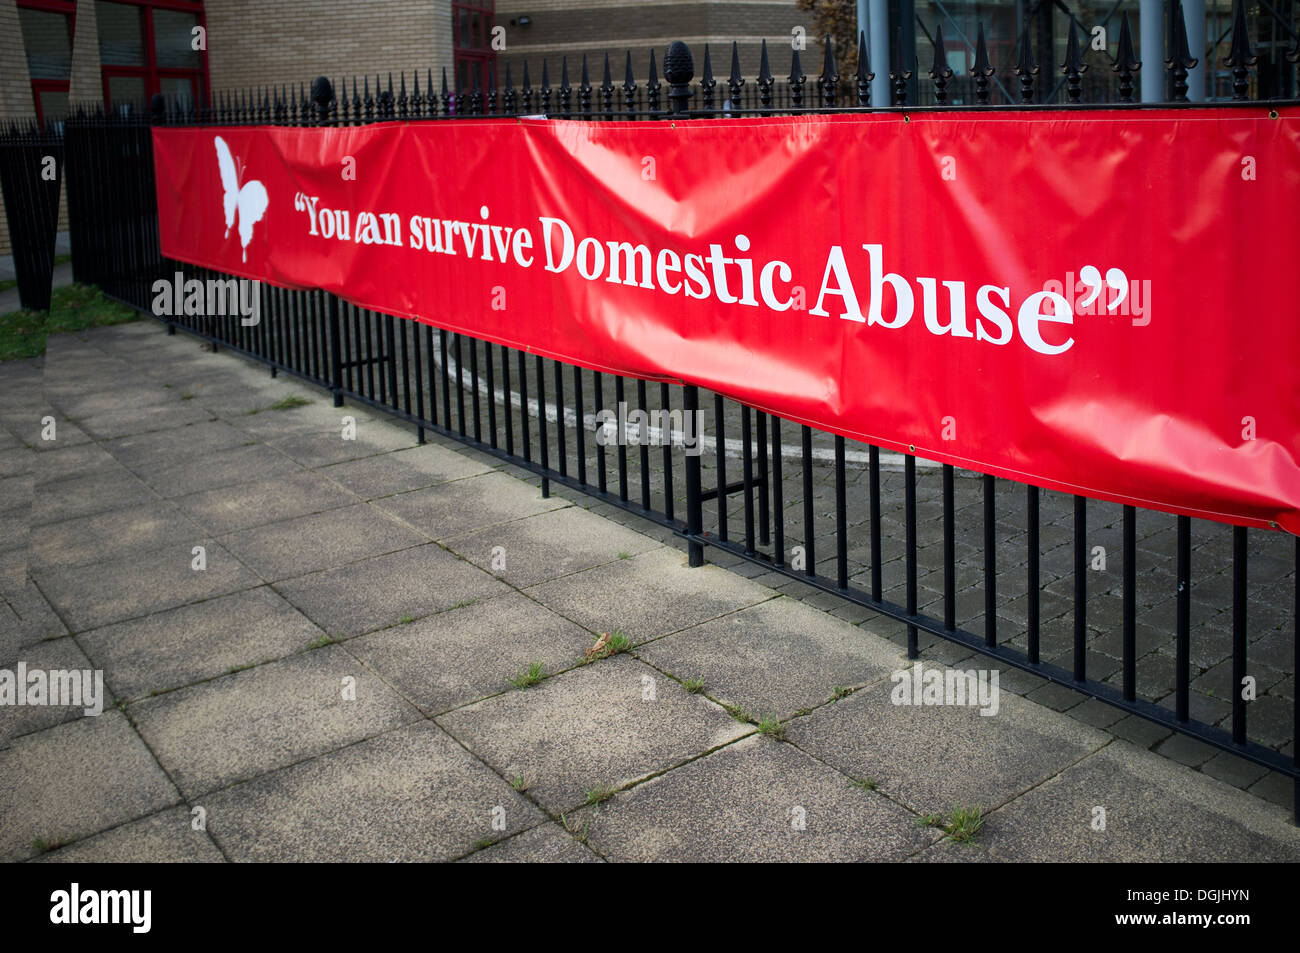 A banner with a quote about domestic abuse. Stock Photo